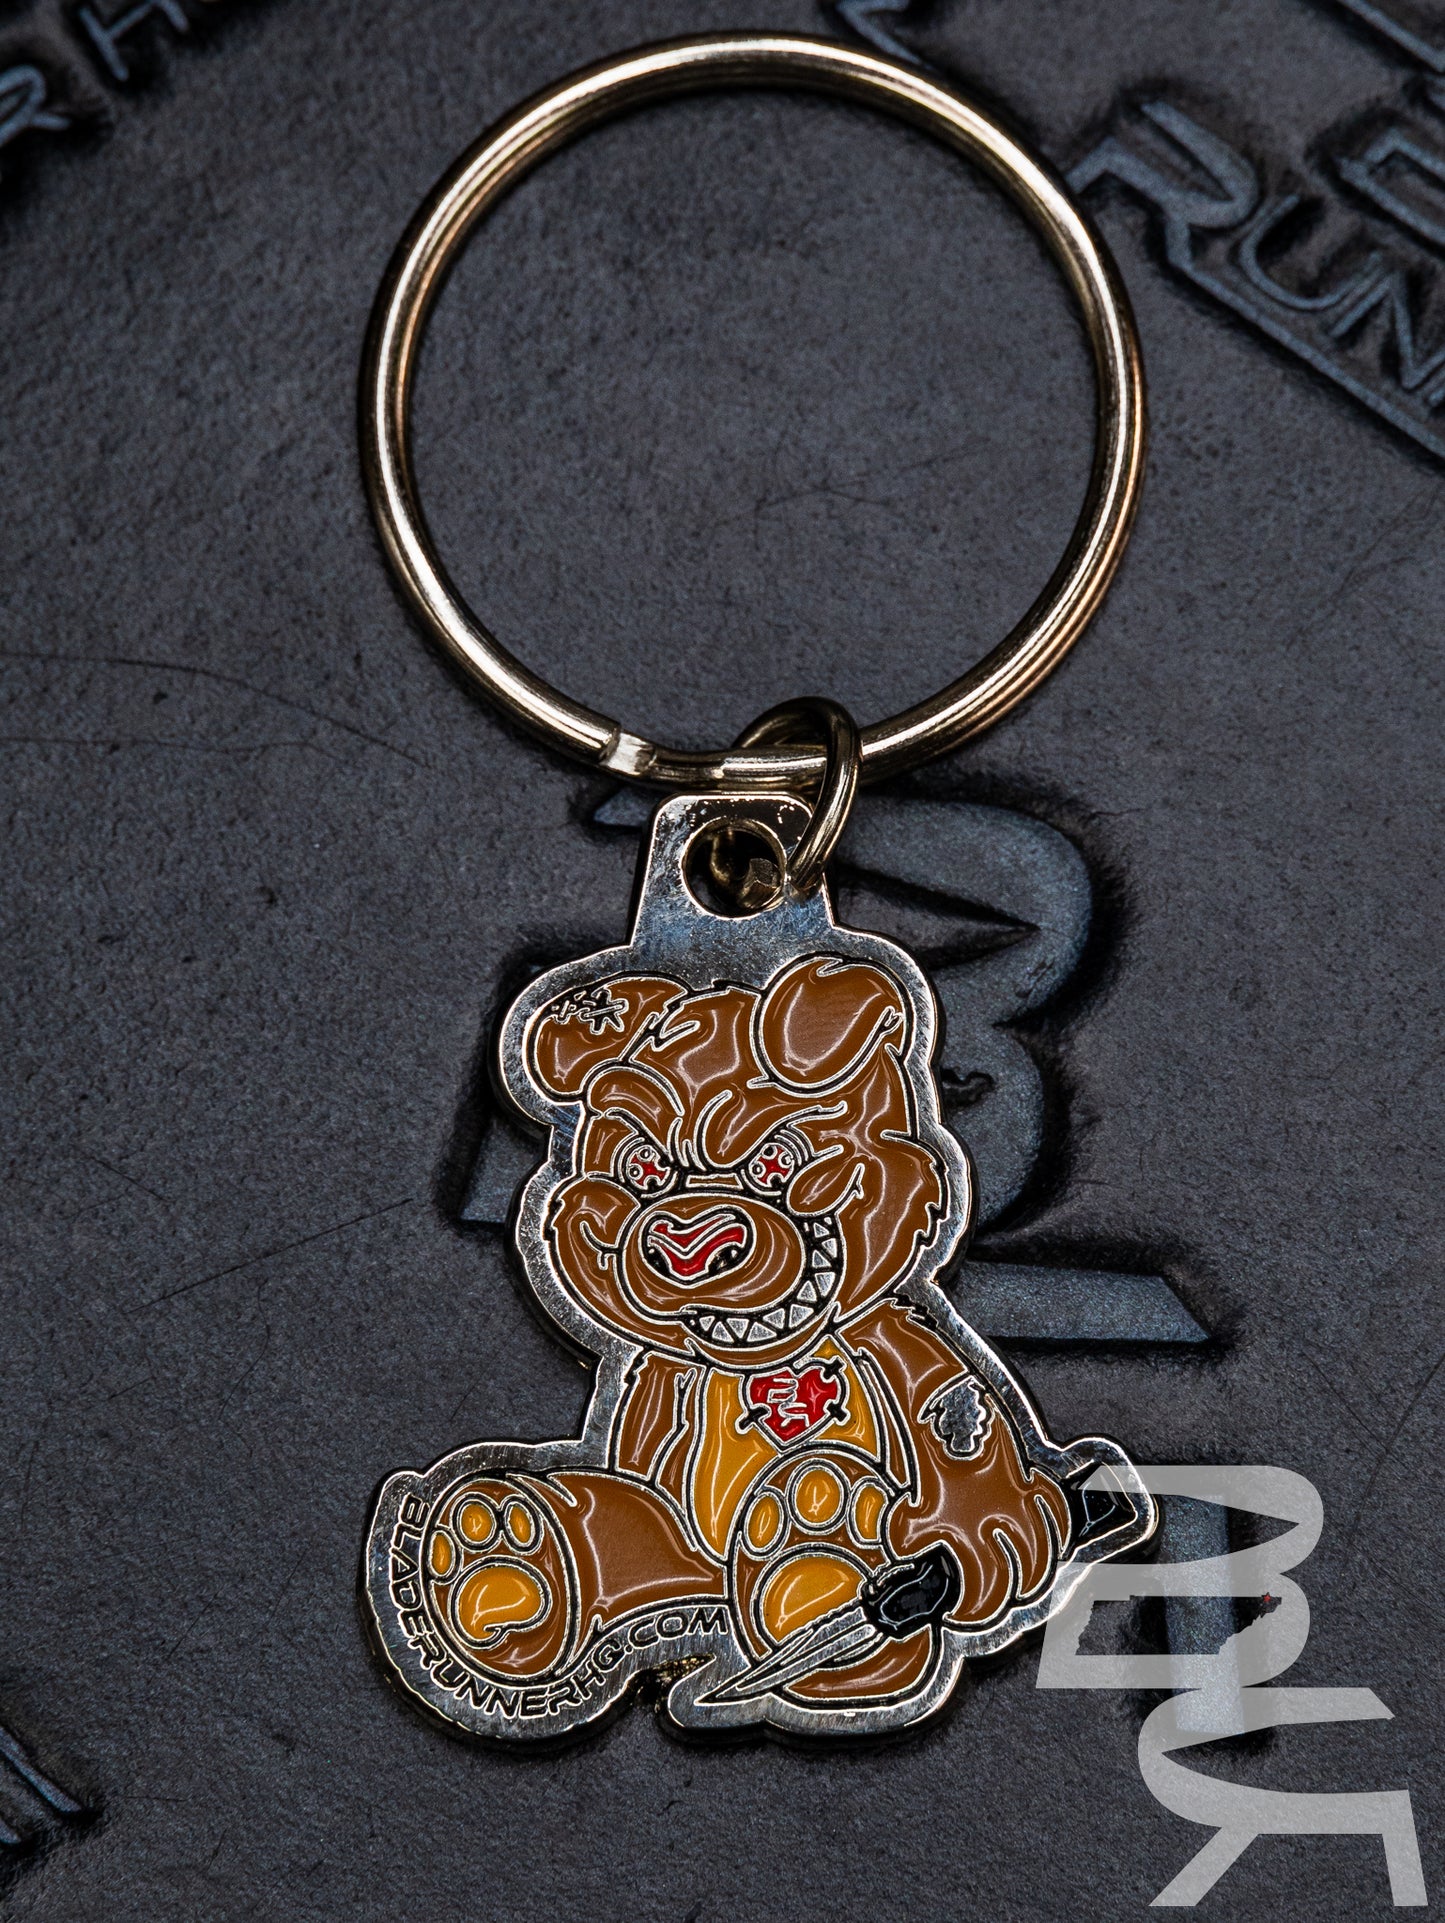 BladeRunner HQ “Snugglez” Keychain About 1.5 by 1.5” BR Stamped Back